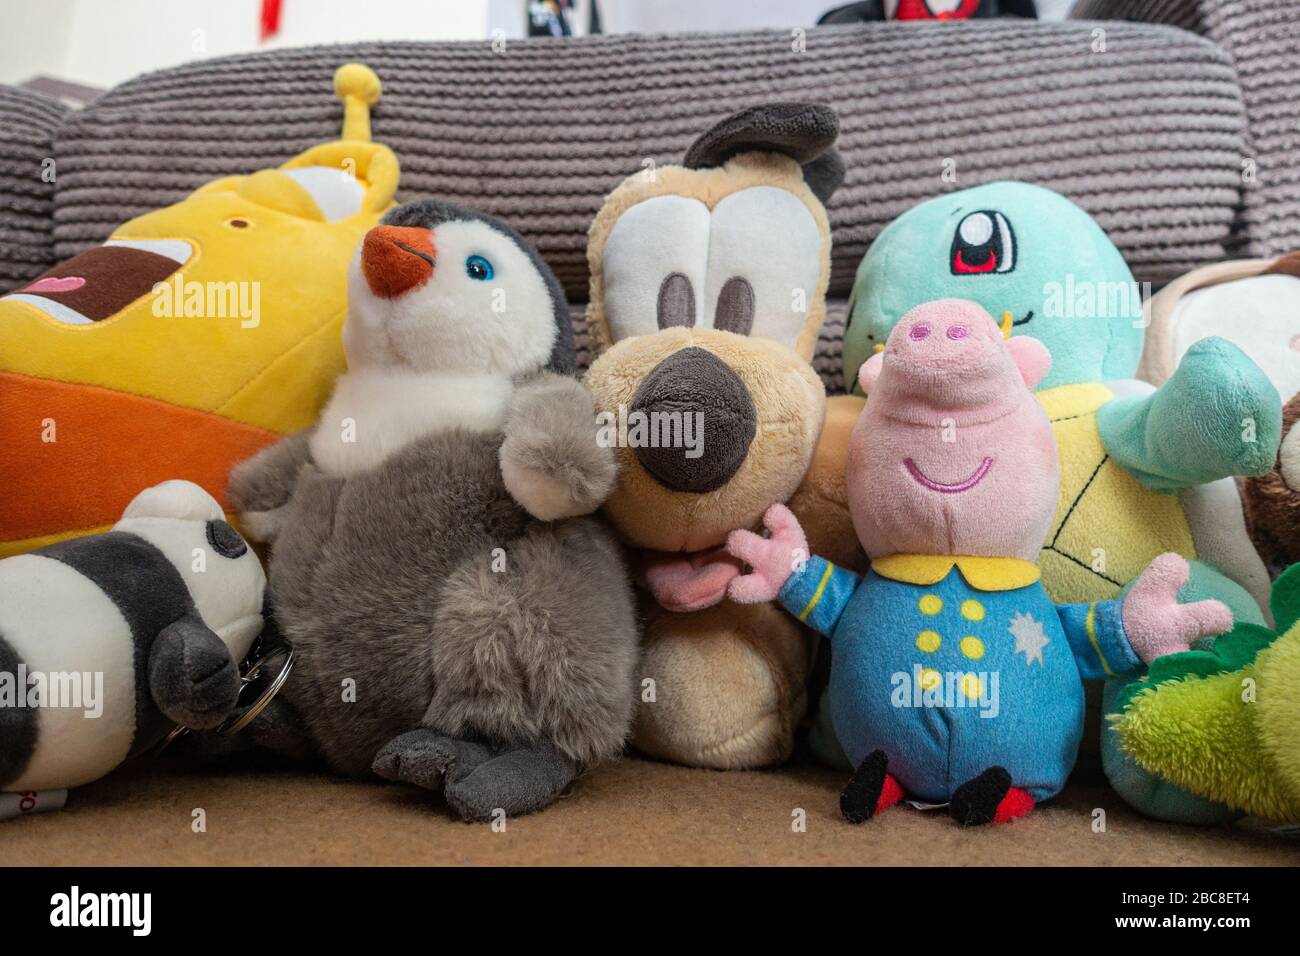 Cuddly toys resembling various cartoon characters lined up along a settee. Stock Photo